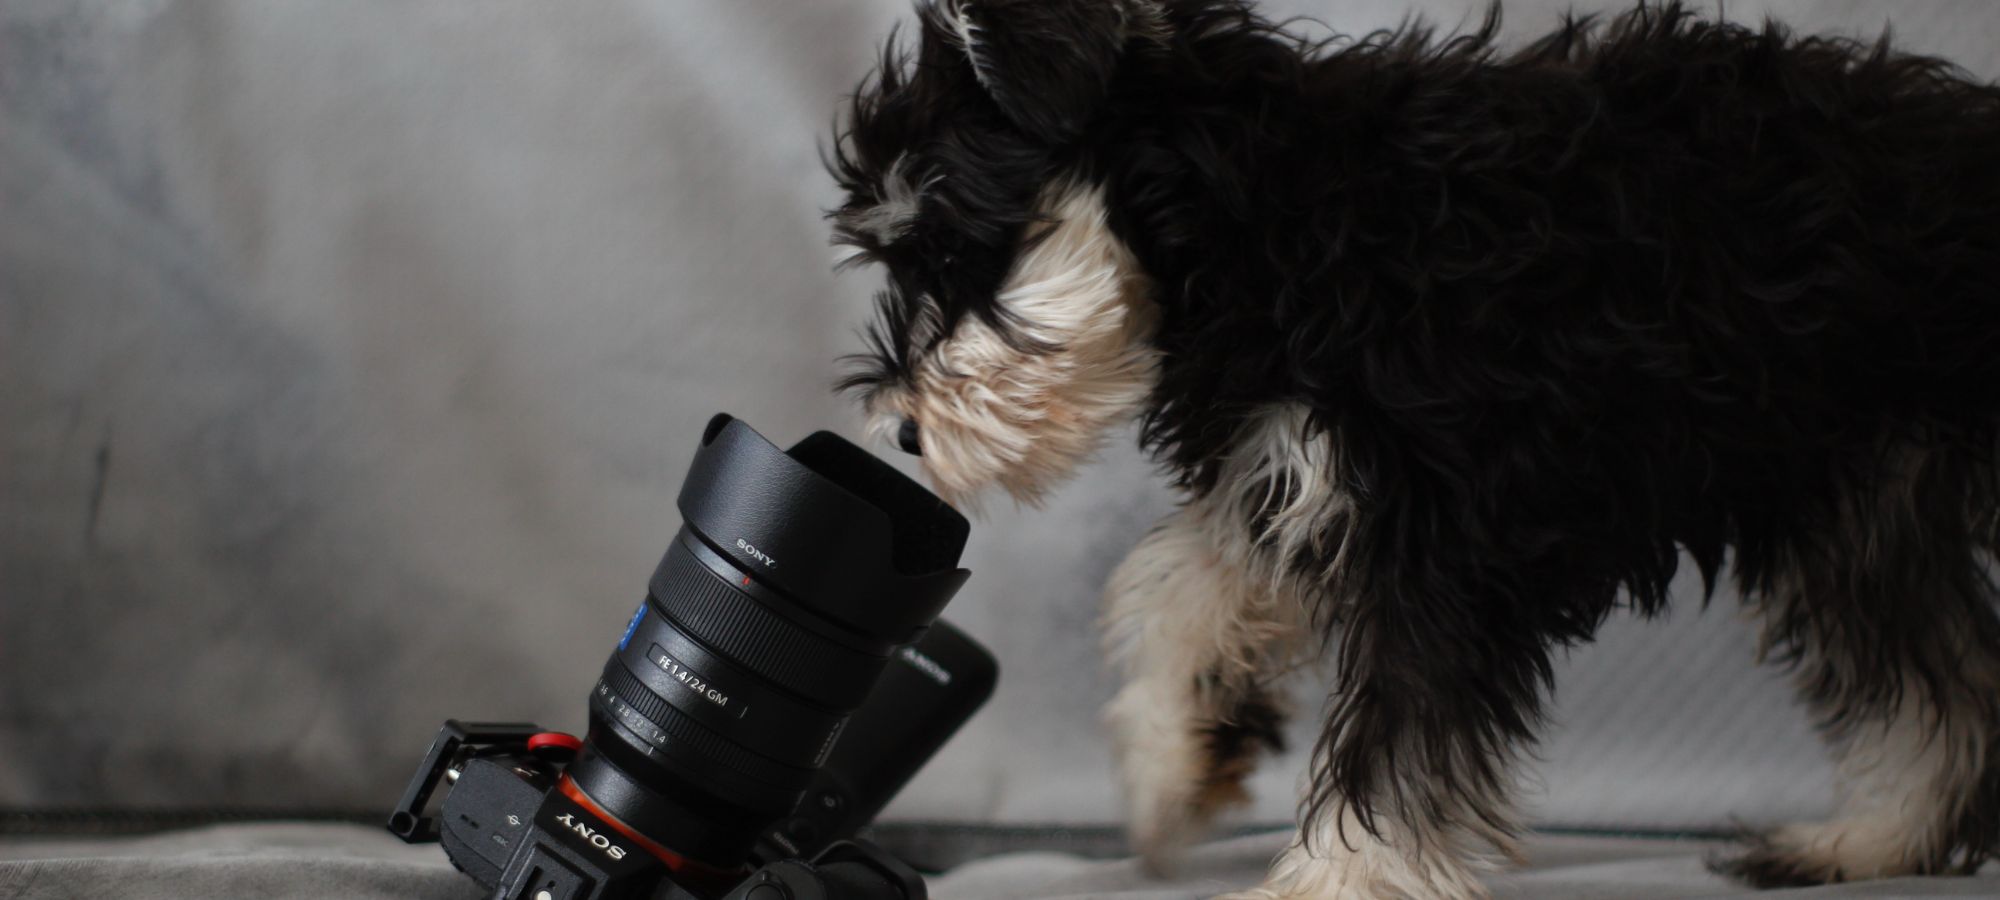 How to take a good photo of your pet